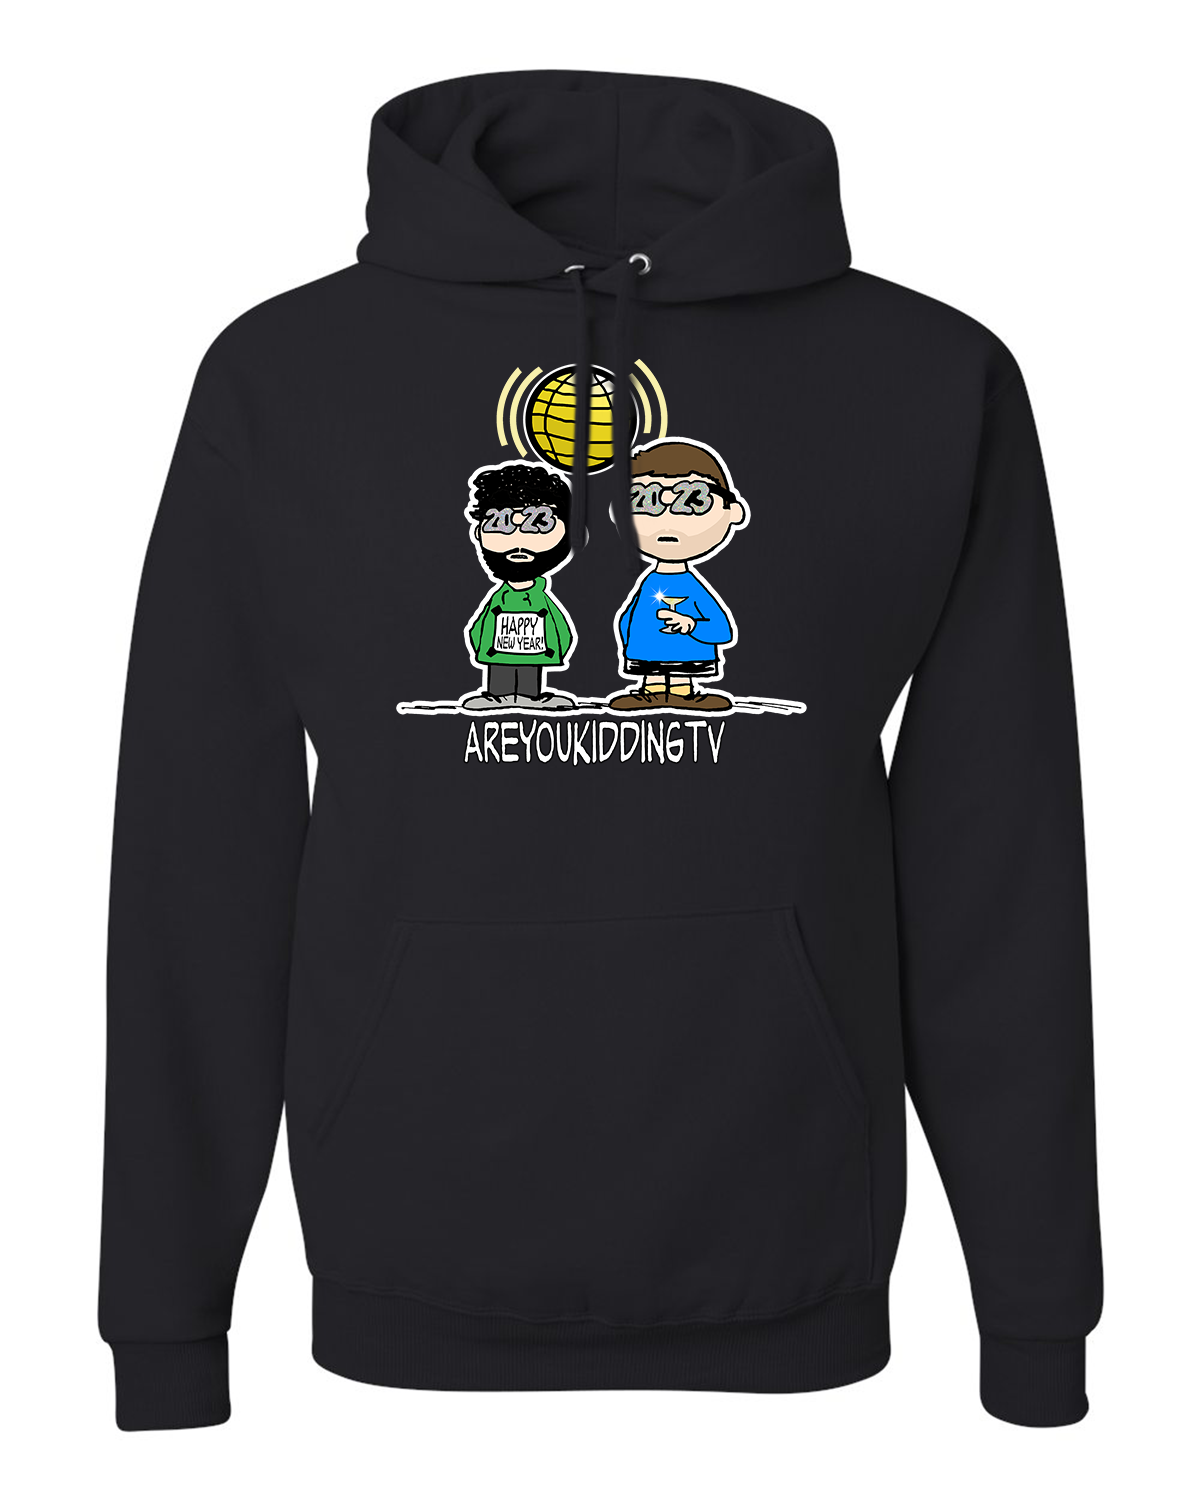 Are You Kidding New Year's - Hoodie